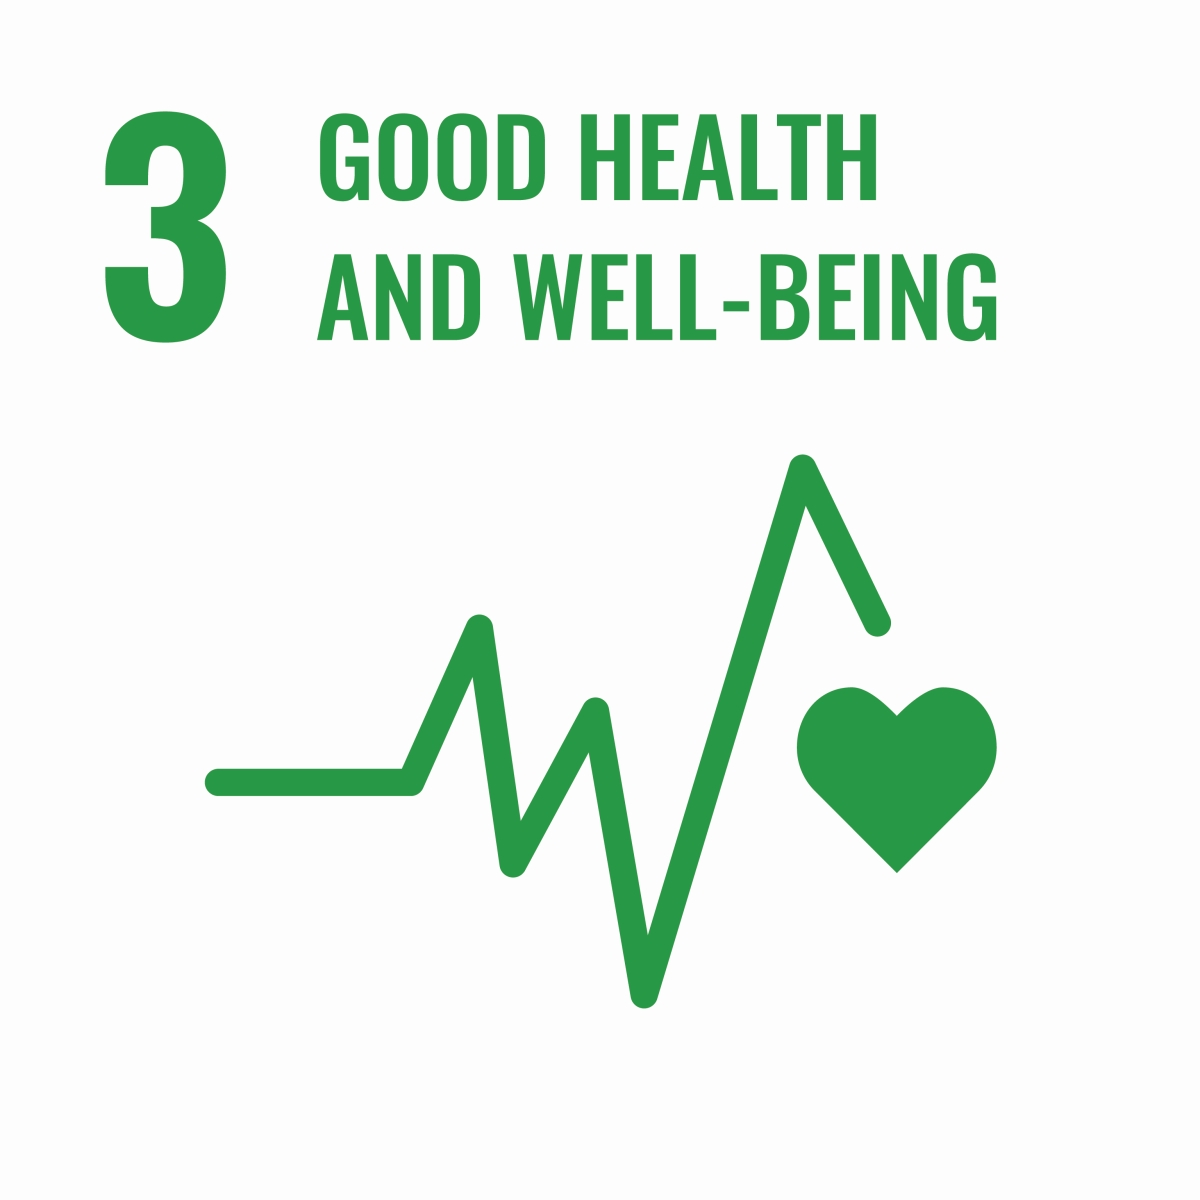 [Translate to German:] Good health and well-being